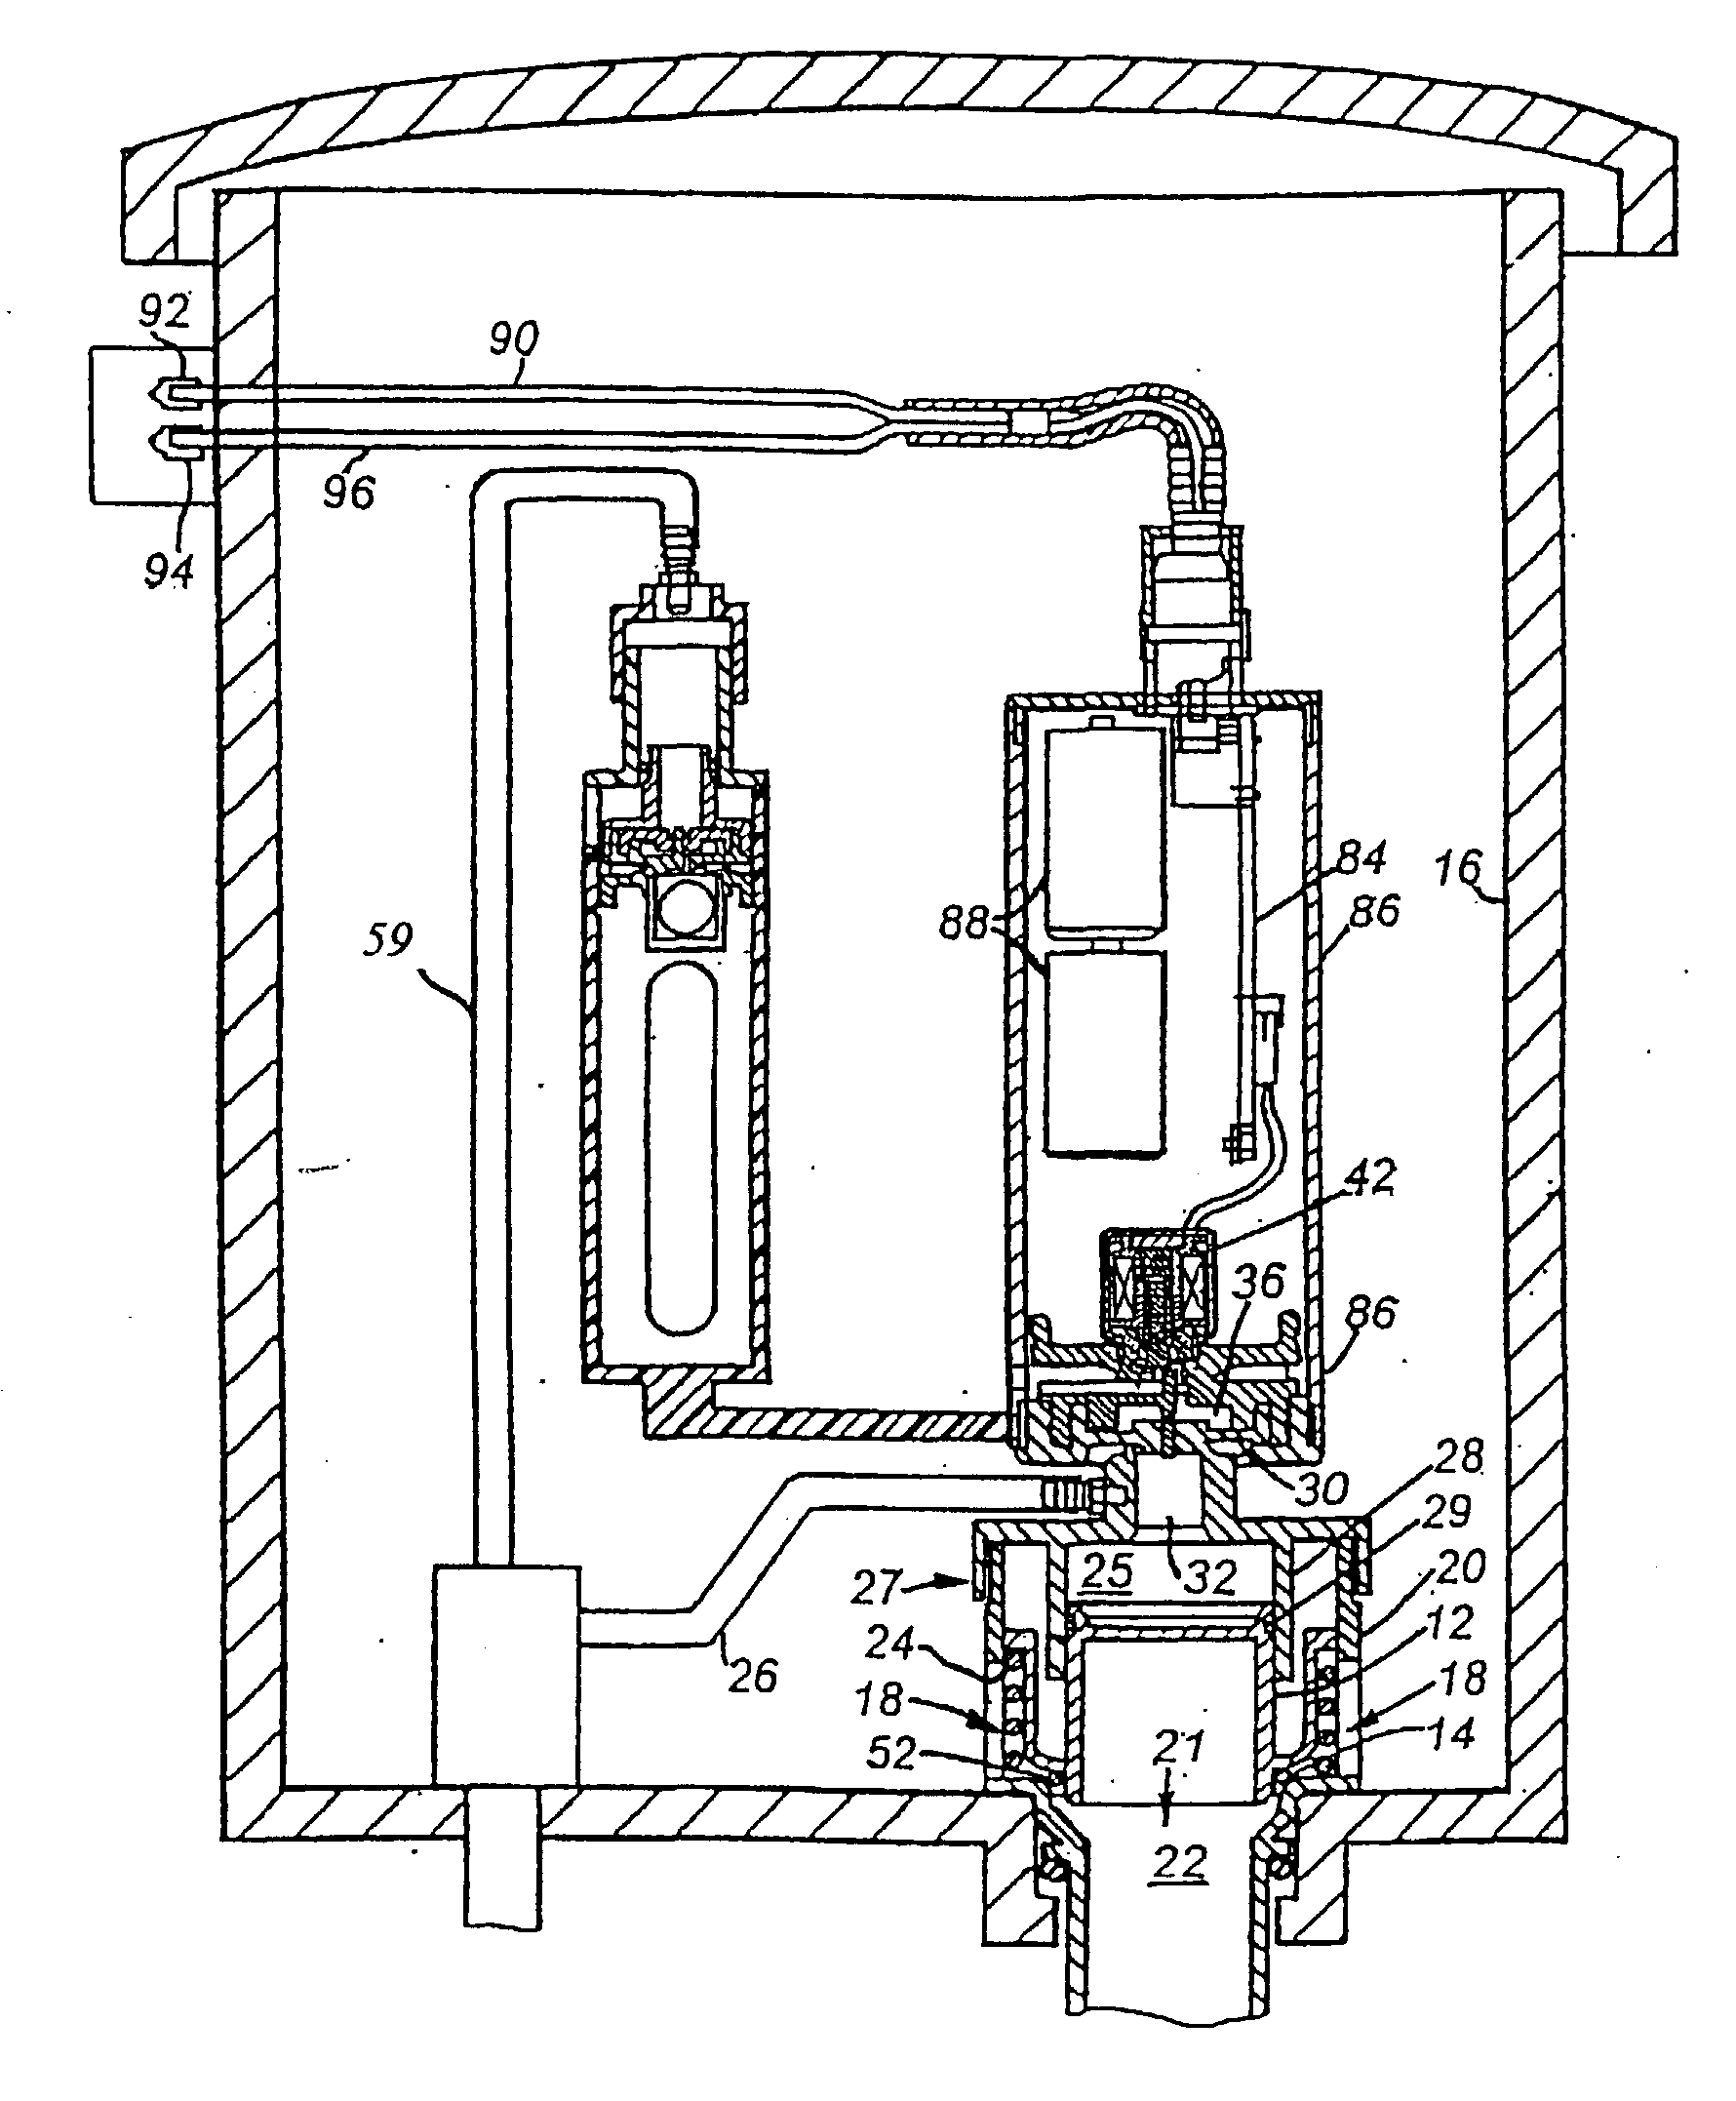 Toilet flusher with novel valves and controls